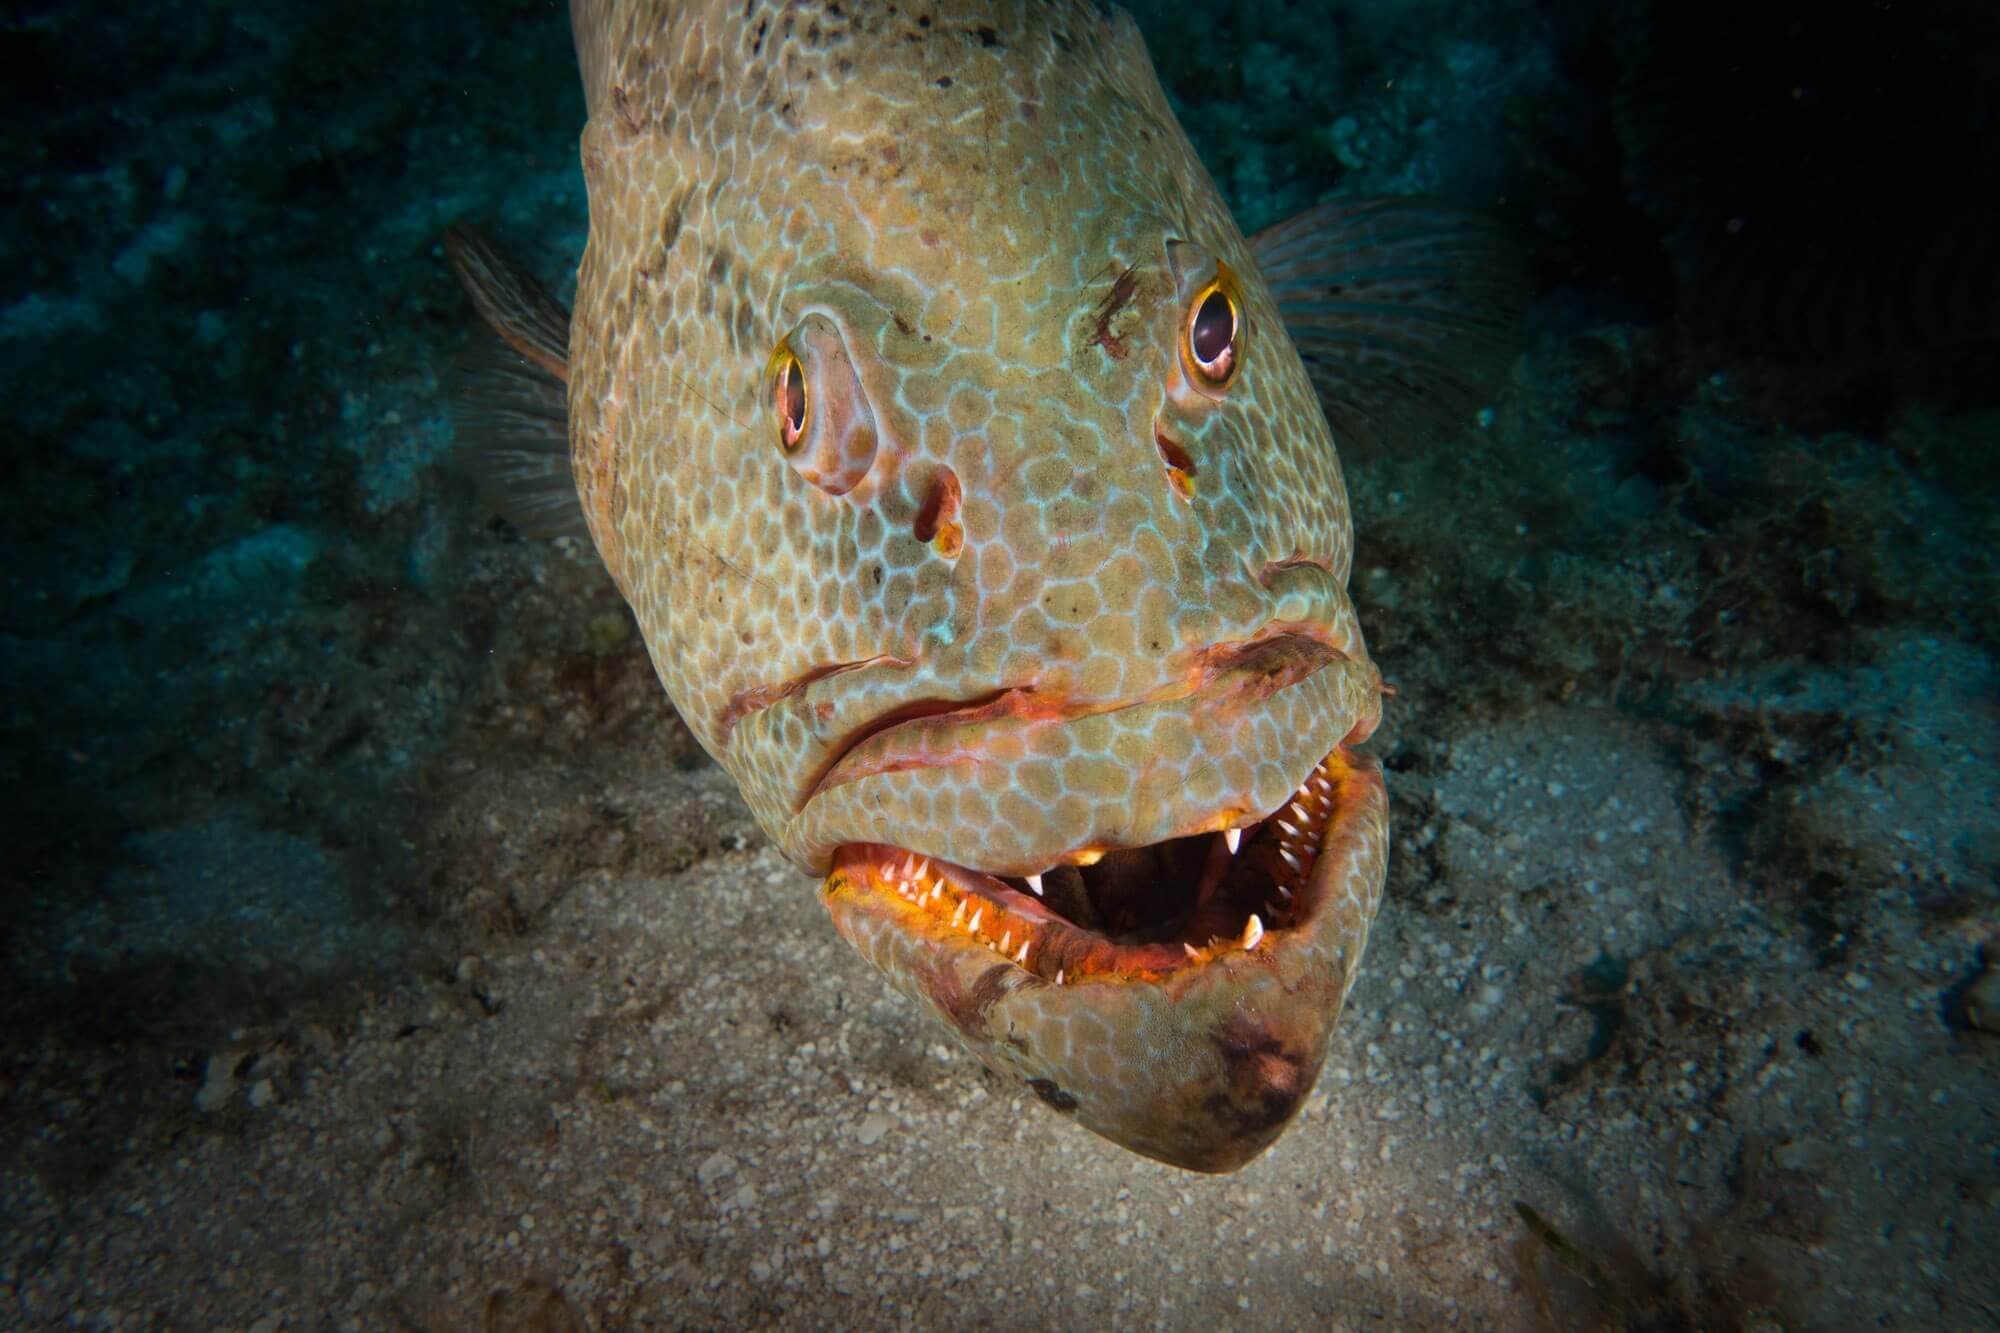 A grouper looks me in the eye at the Hole in the Wall dive site in Roatán